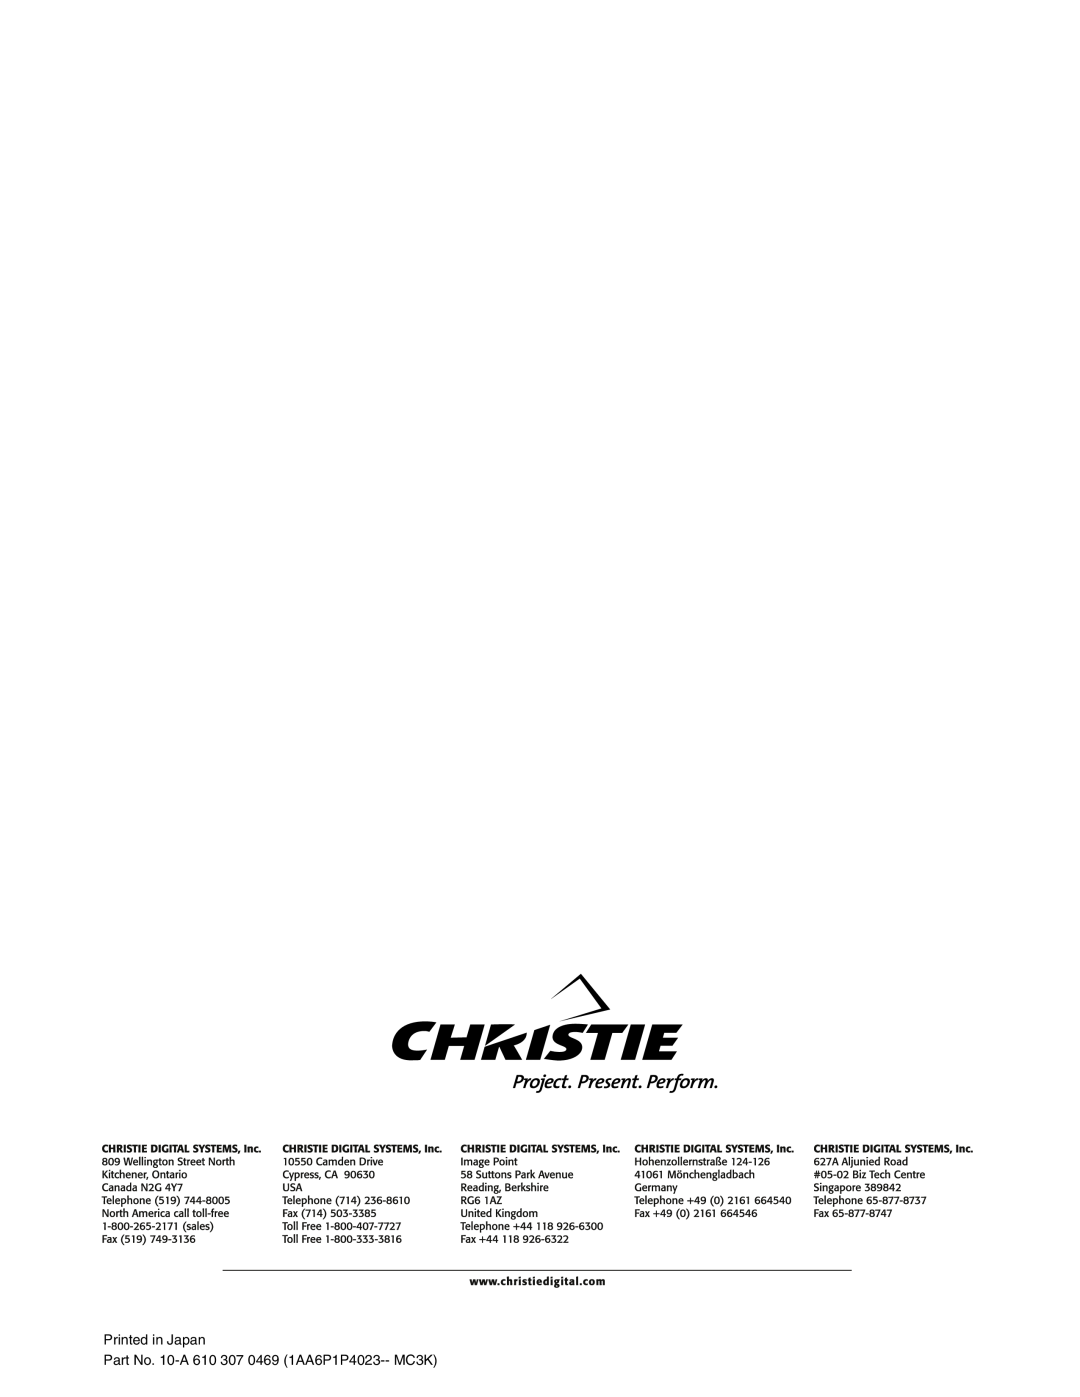 Christie Digital Systems 38-VIV207-01 user manual Printed in Japan Part No. 10-A 610 307 0469 1AA6P1P4023-- MC3K 